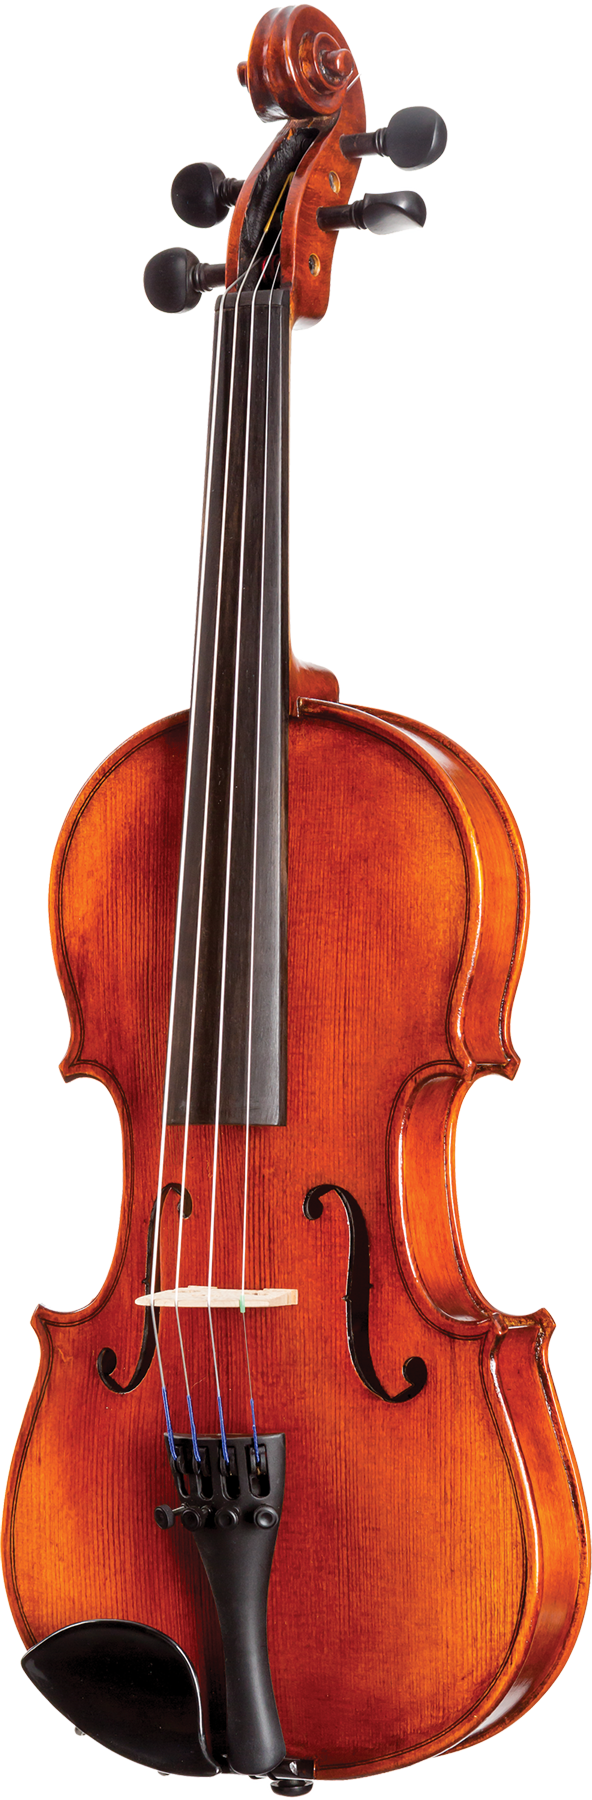 Howard Core A11 Student Violin Outfit Front